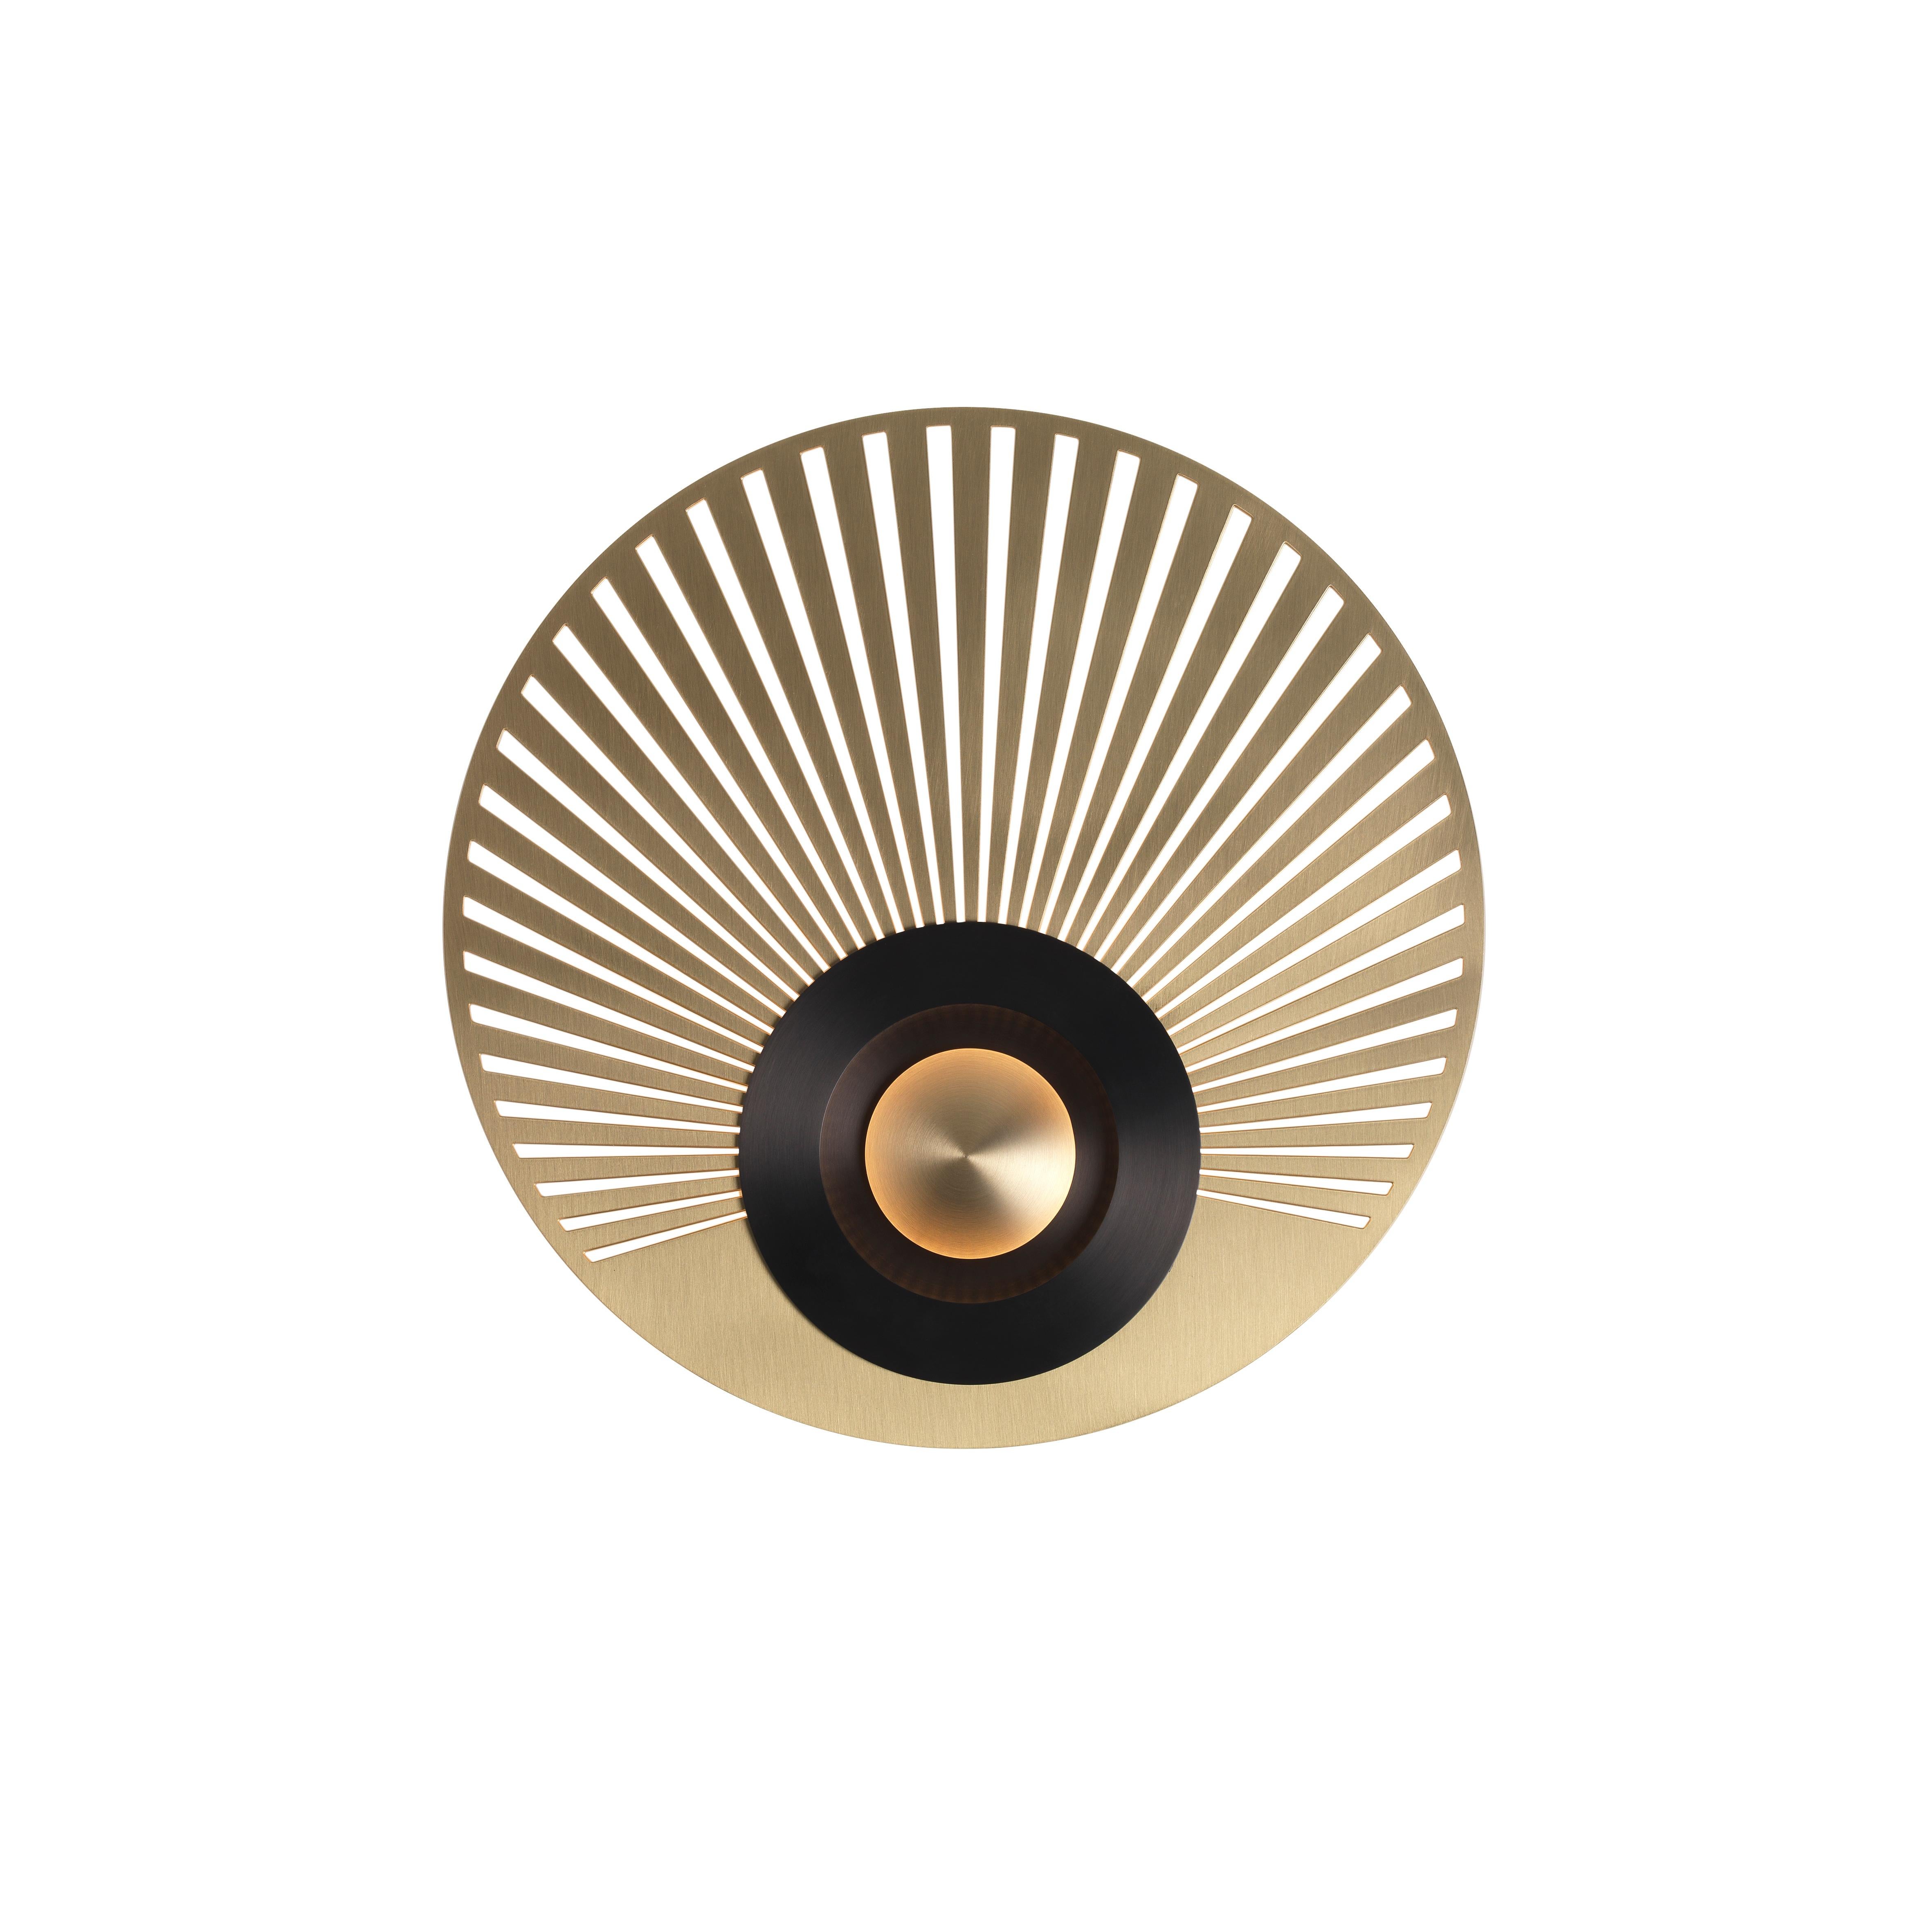 Earth Radian wall light by Emilie Cathelineau
Dimensions: D35 X H5 cm
Materials: Solid brass, Polycarbonate diffuser.
Others finishes and dimensions are available.

All our lamps can be wired according to each country. If sold to the USA it